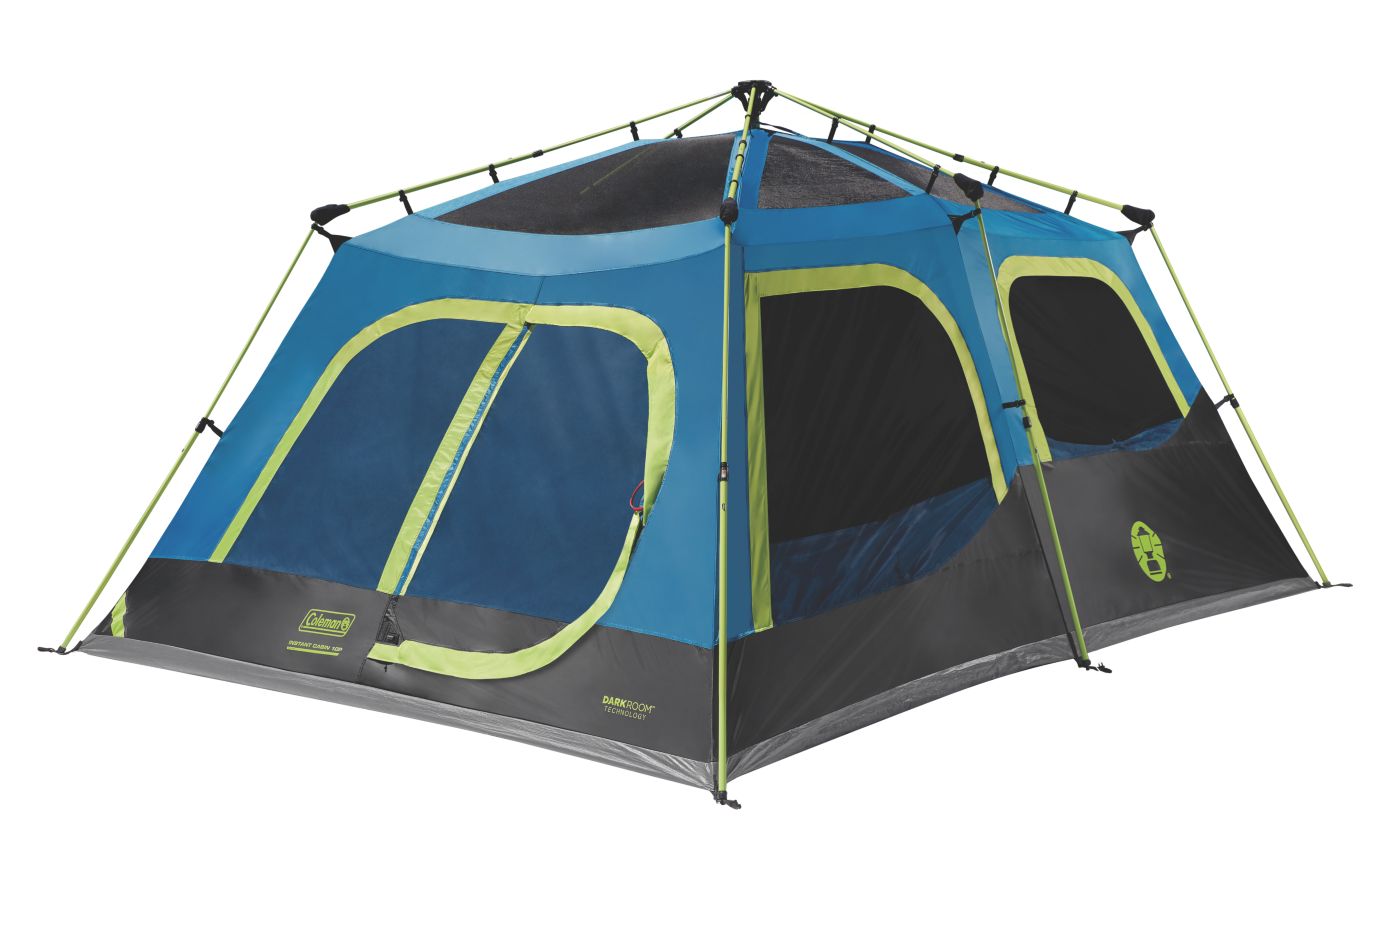 Coleman® 10-Person Dark Room™ Cabin Camping Tent with Instant Setup, 1 Room, Blue - image 5 of 6